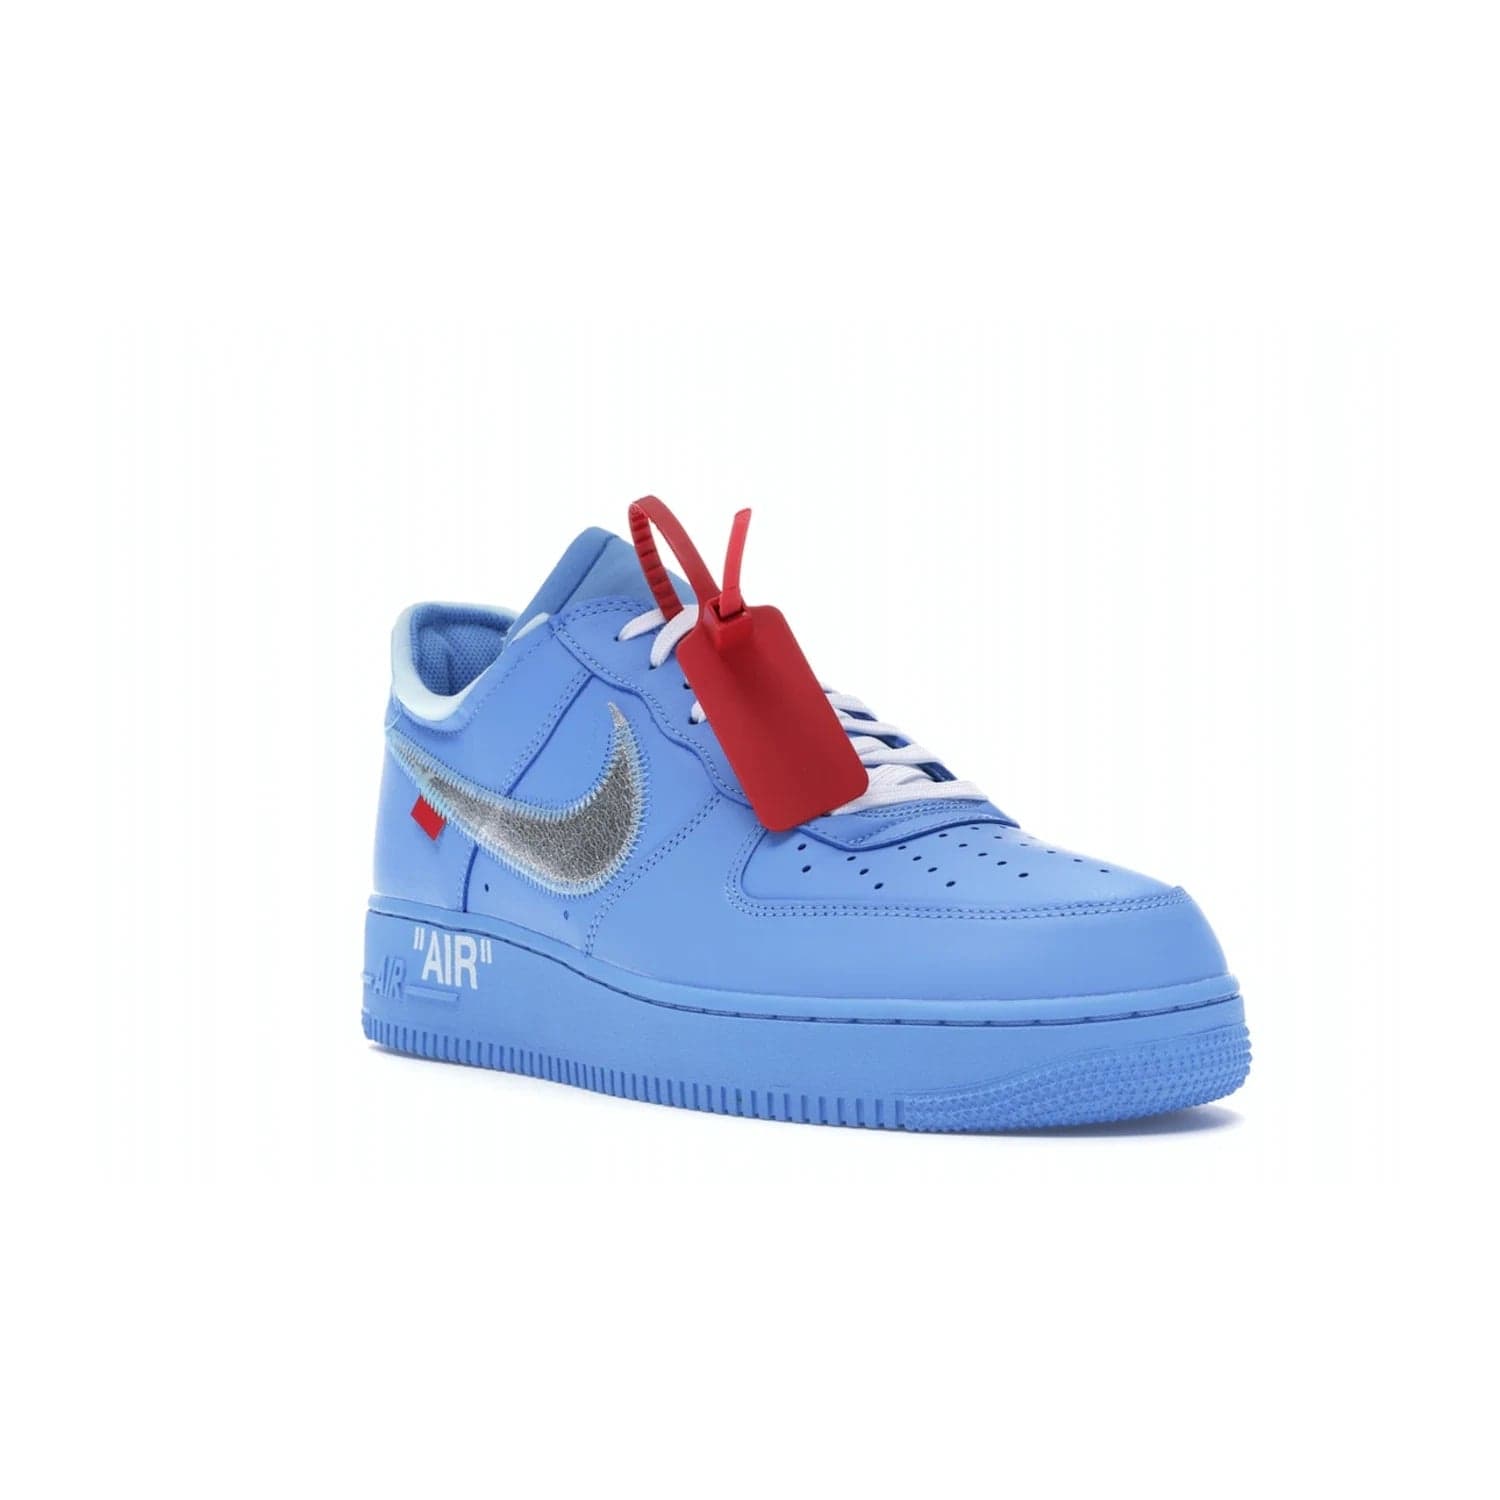 Nike Air Force 1 Low Off-White MCA University Blue - Image 6 - Only at www.BallersClubKickz.com - Virgil Abloh's Air Force 1 Low Off-White MCA University Blue: Features University Blue leather and midsole, reflective silver Nike Swoosh, red zip tie, white laces, and iconic Off-White™ branding. A must-have for any Virgil Abloh enthusiast.